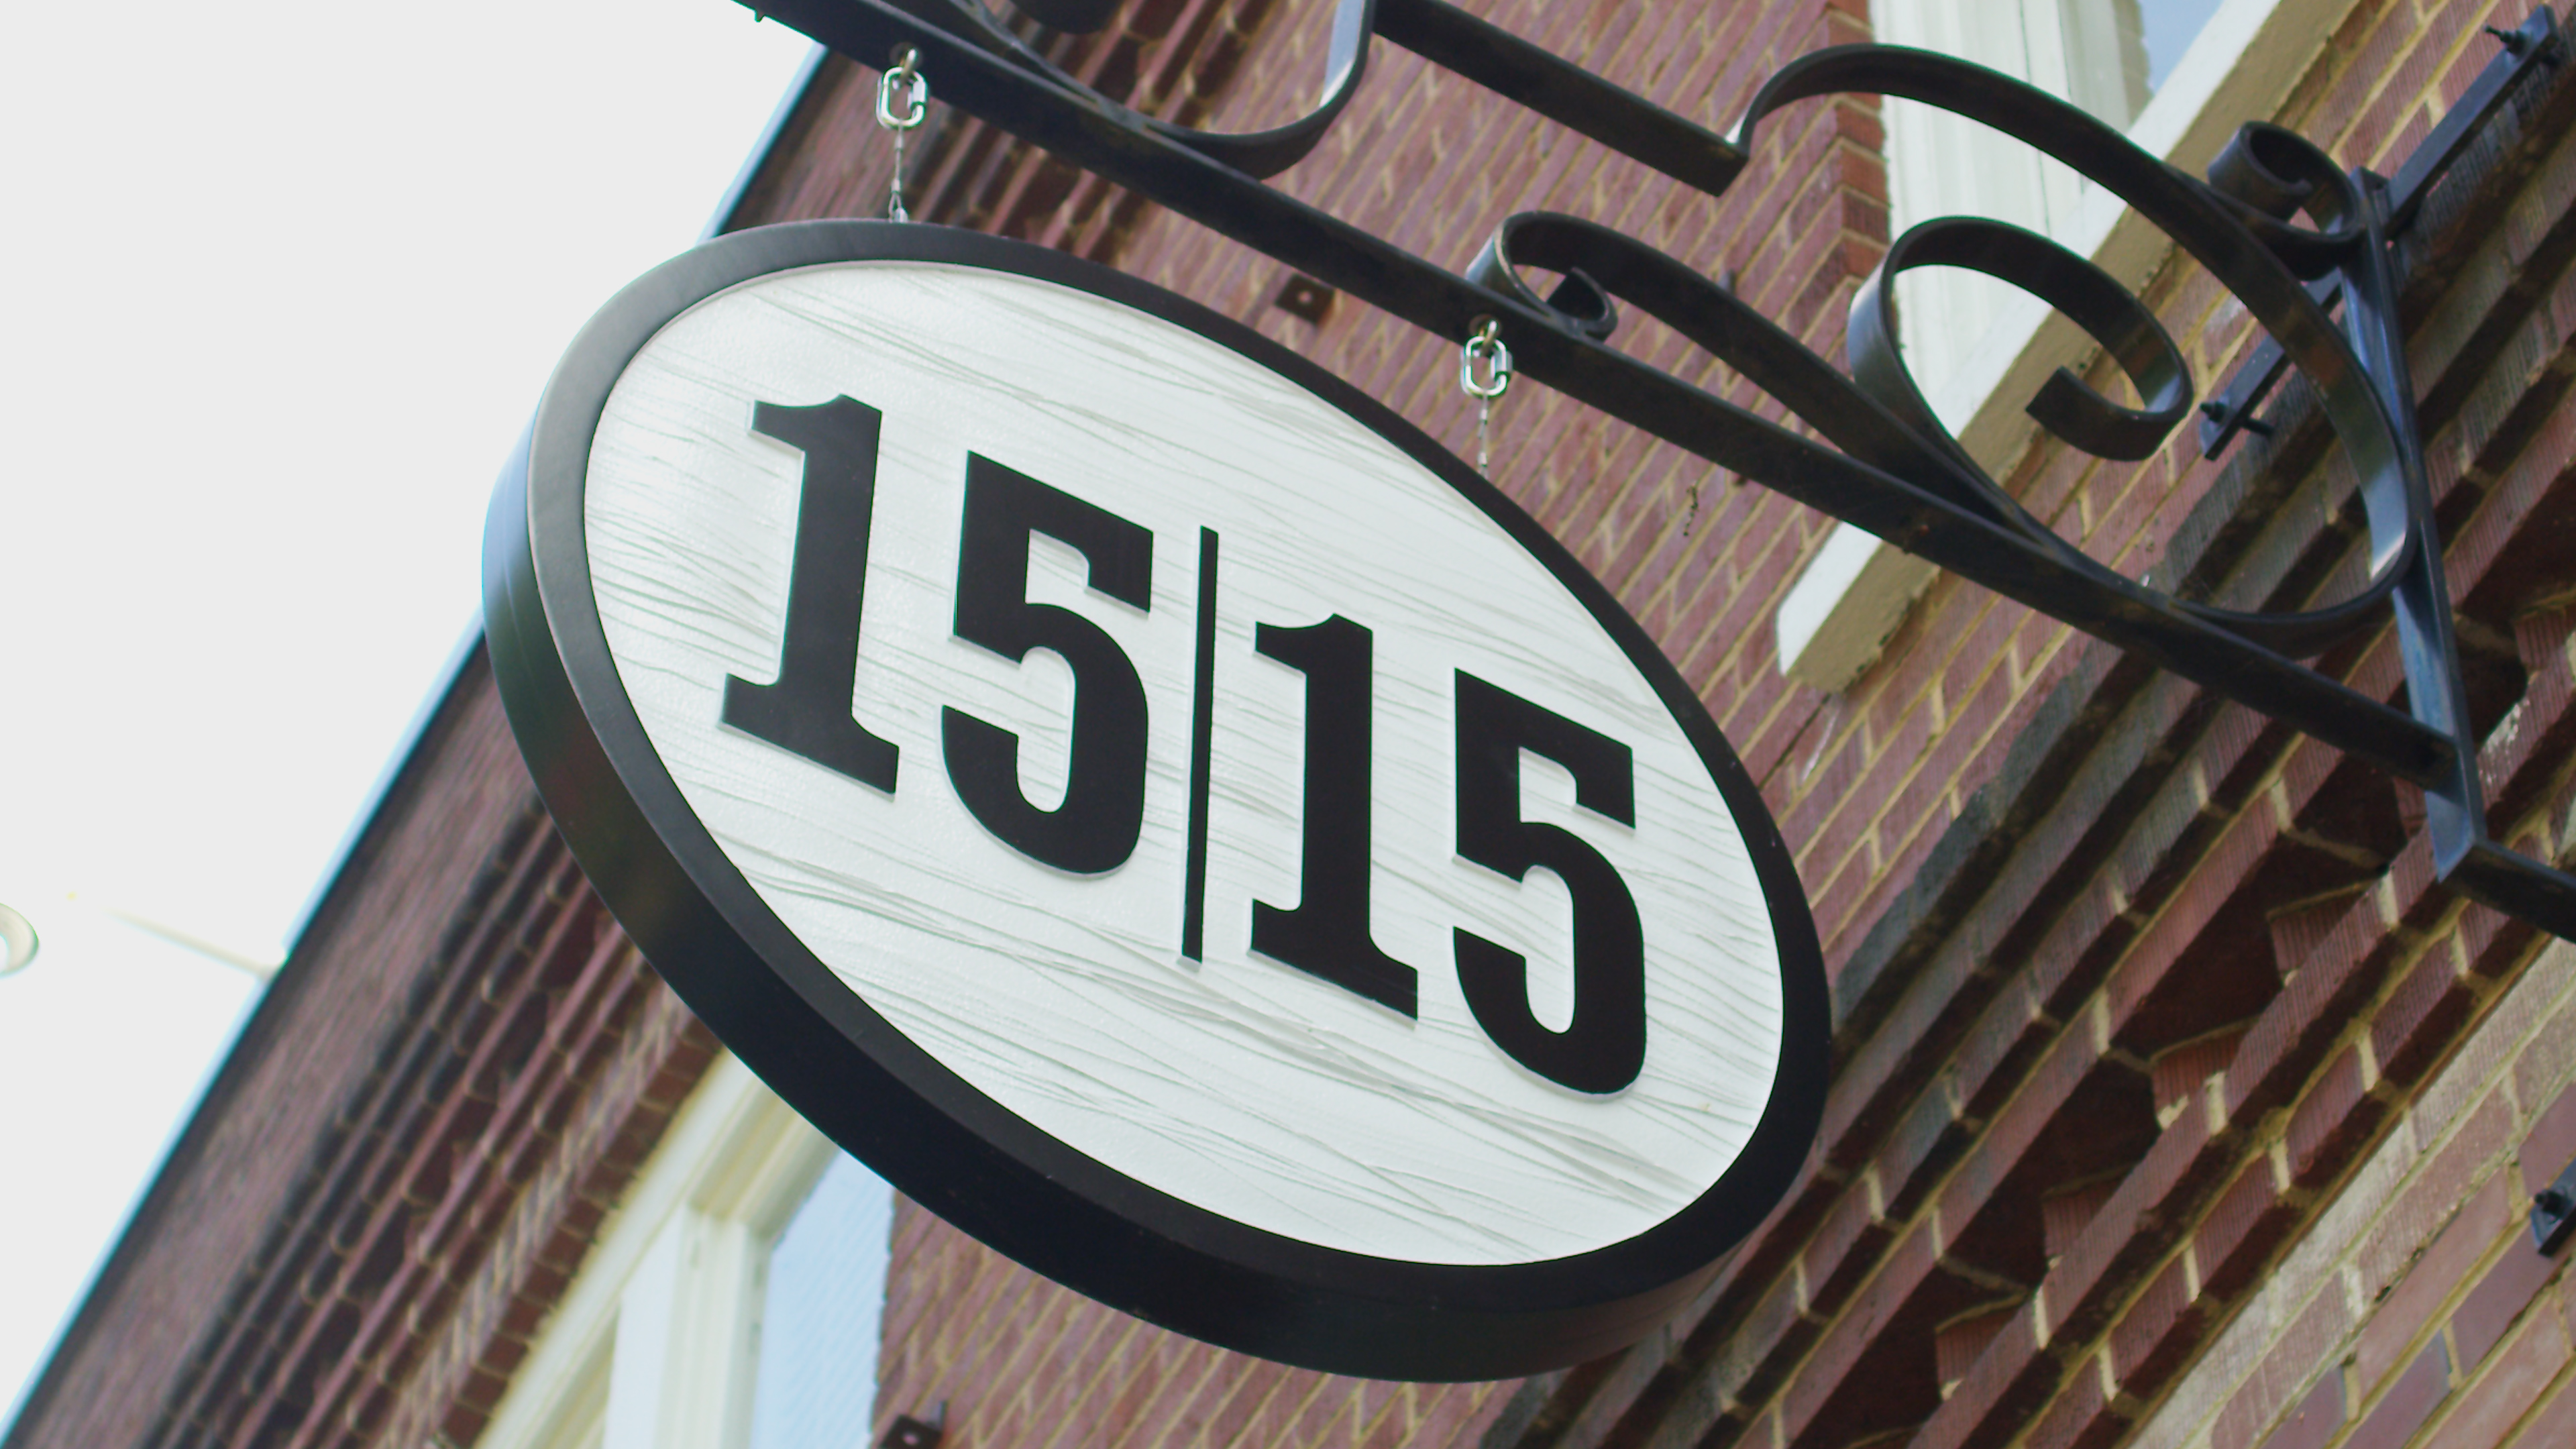 1515 on a storefront sign